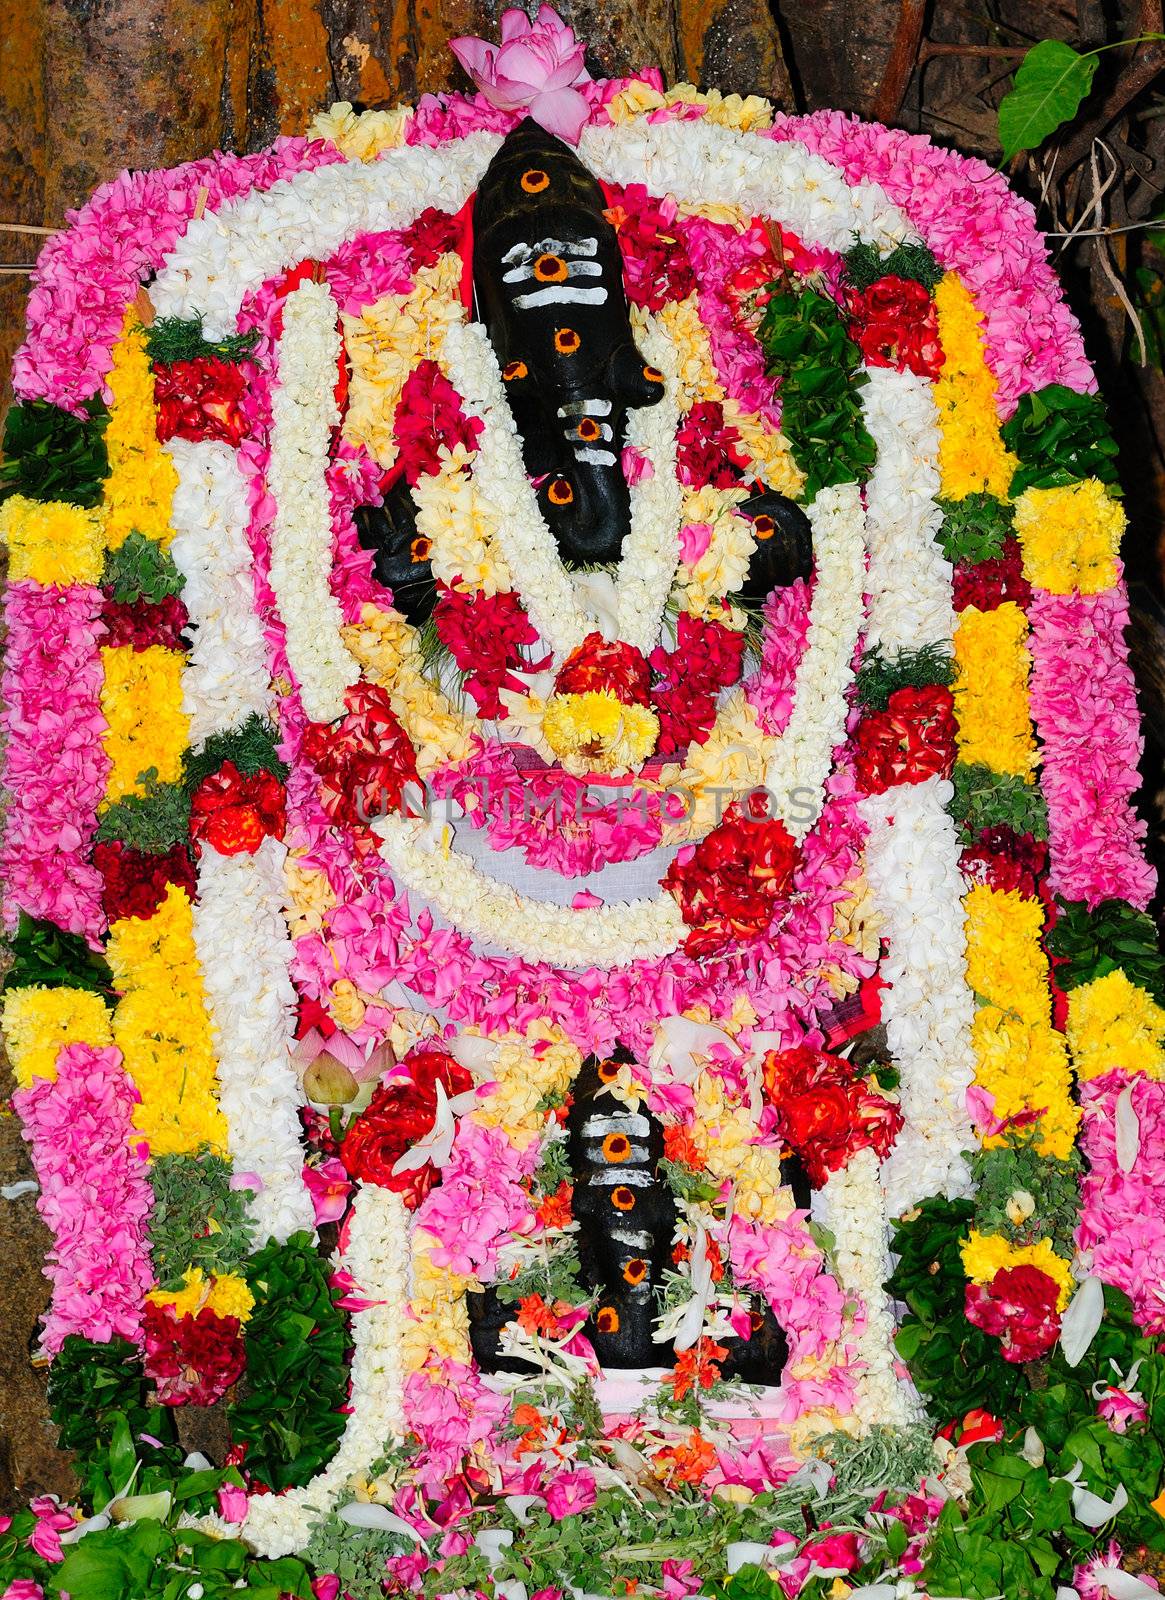 Beautifully ornated and decorated Lord Ganesha with lowers